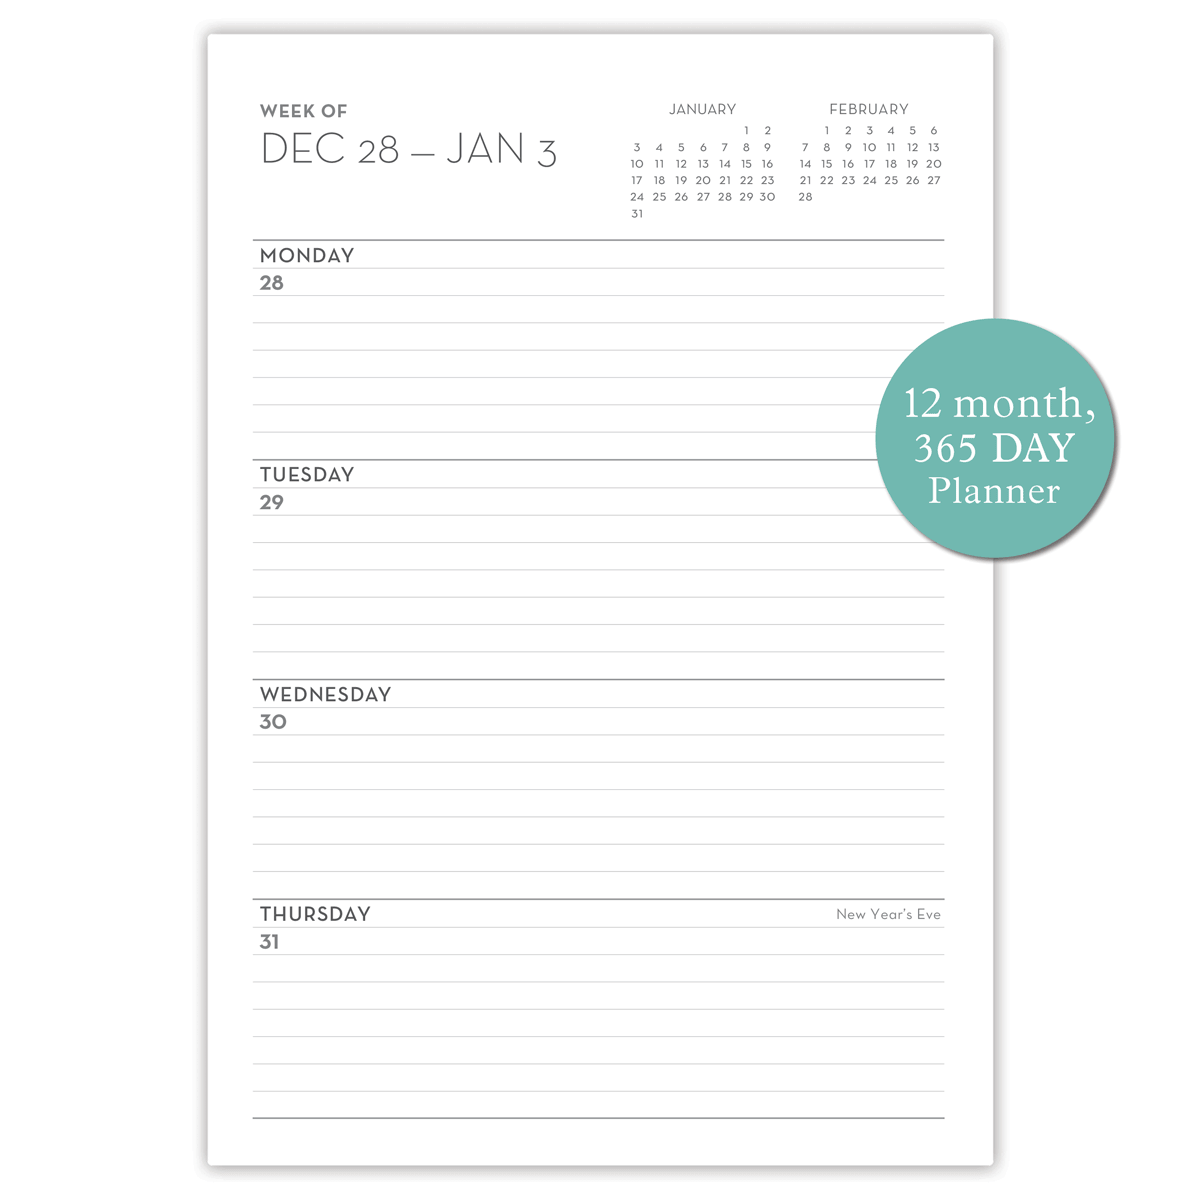 Connected (Planner) by Jenn Thatcher